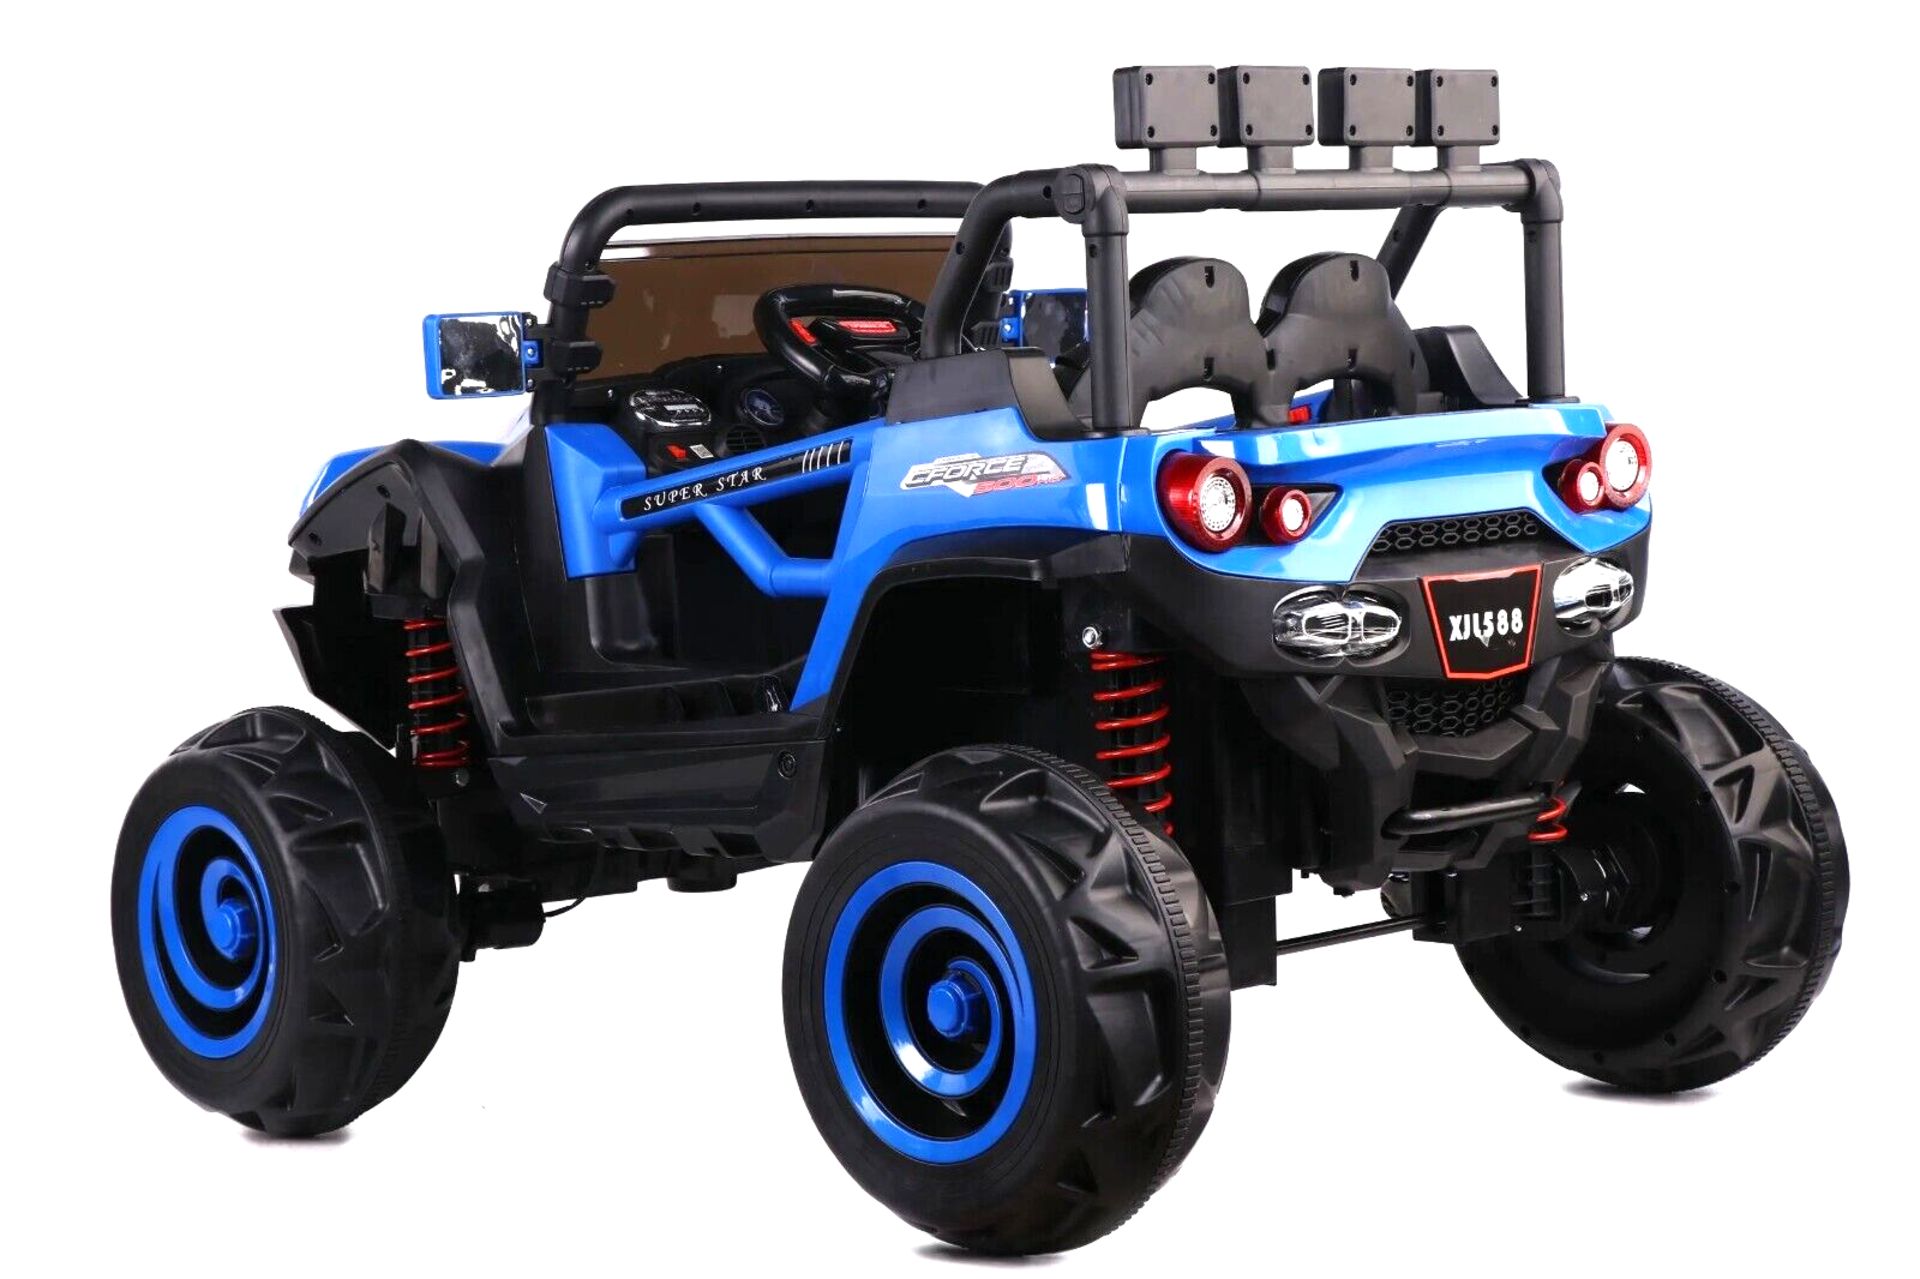 JOB LOT 5 X BLUE 4X4 ATV/UTV KIDS BUGGY JEEP ELECTRIC CAR WITH REMOTE BRAND NEW BOXED - Image 5 of 5